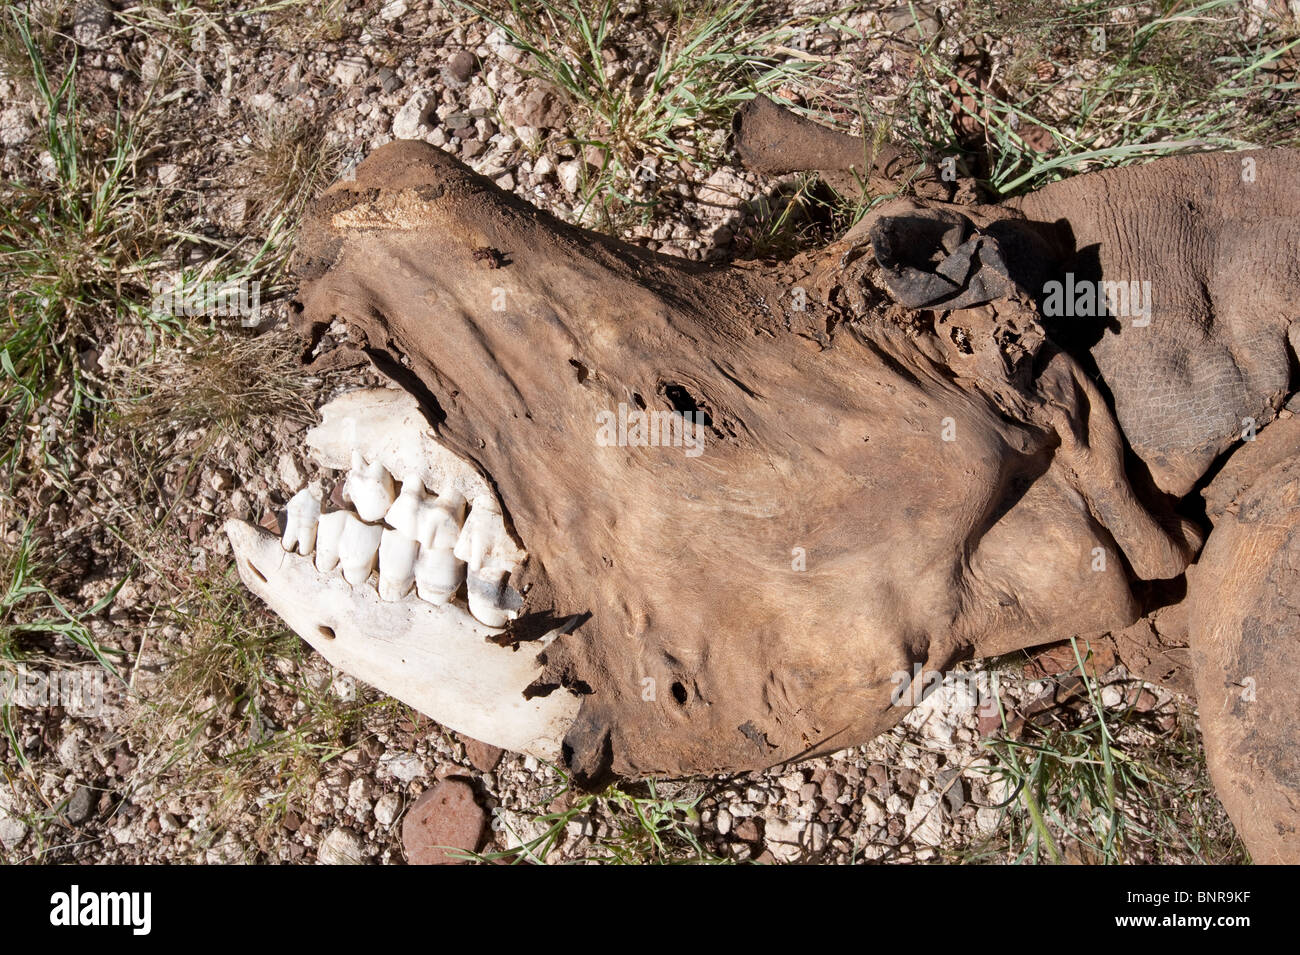 Poached Black Rhino the horn removed Palmwag Conservation Area Namibia Stock Photo